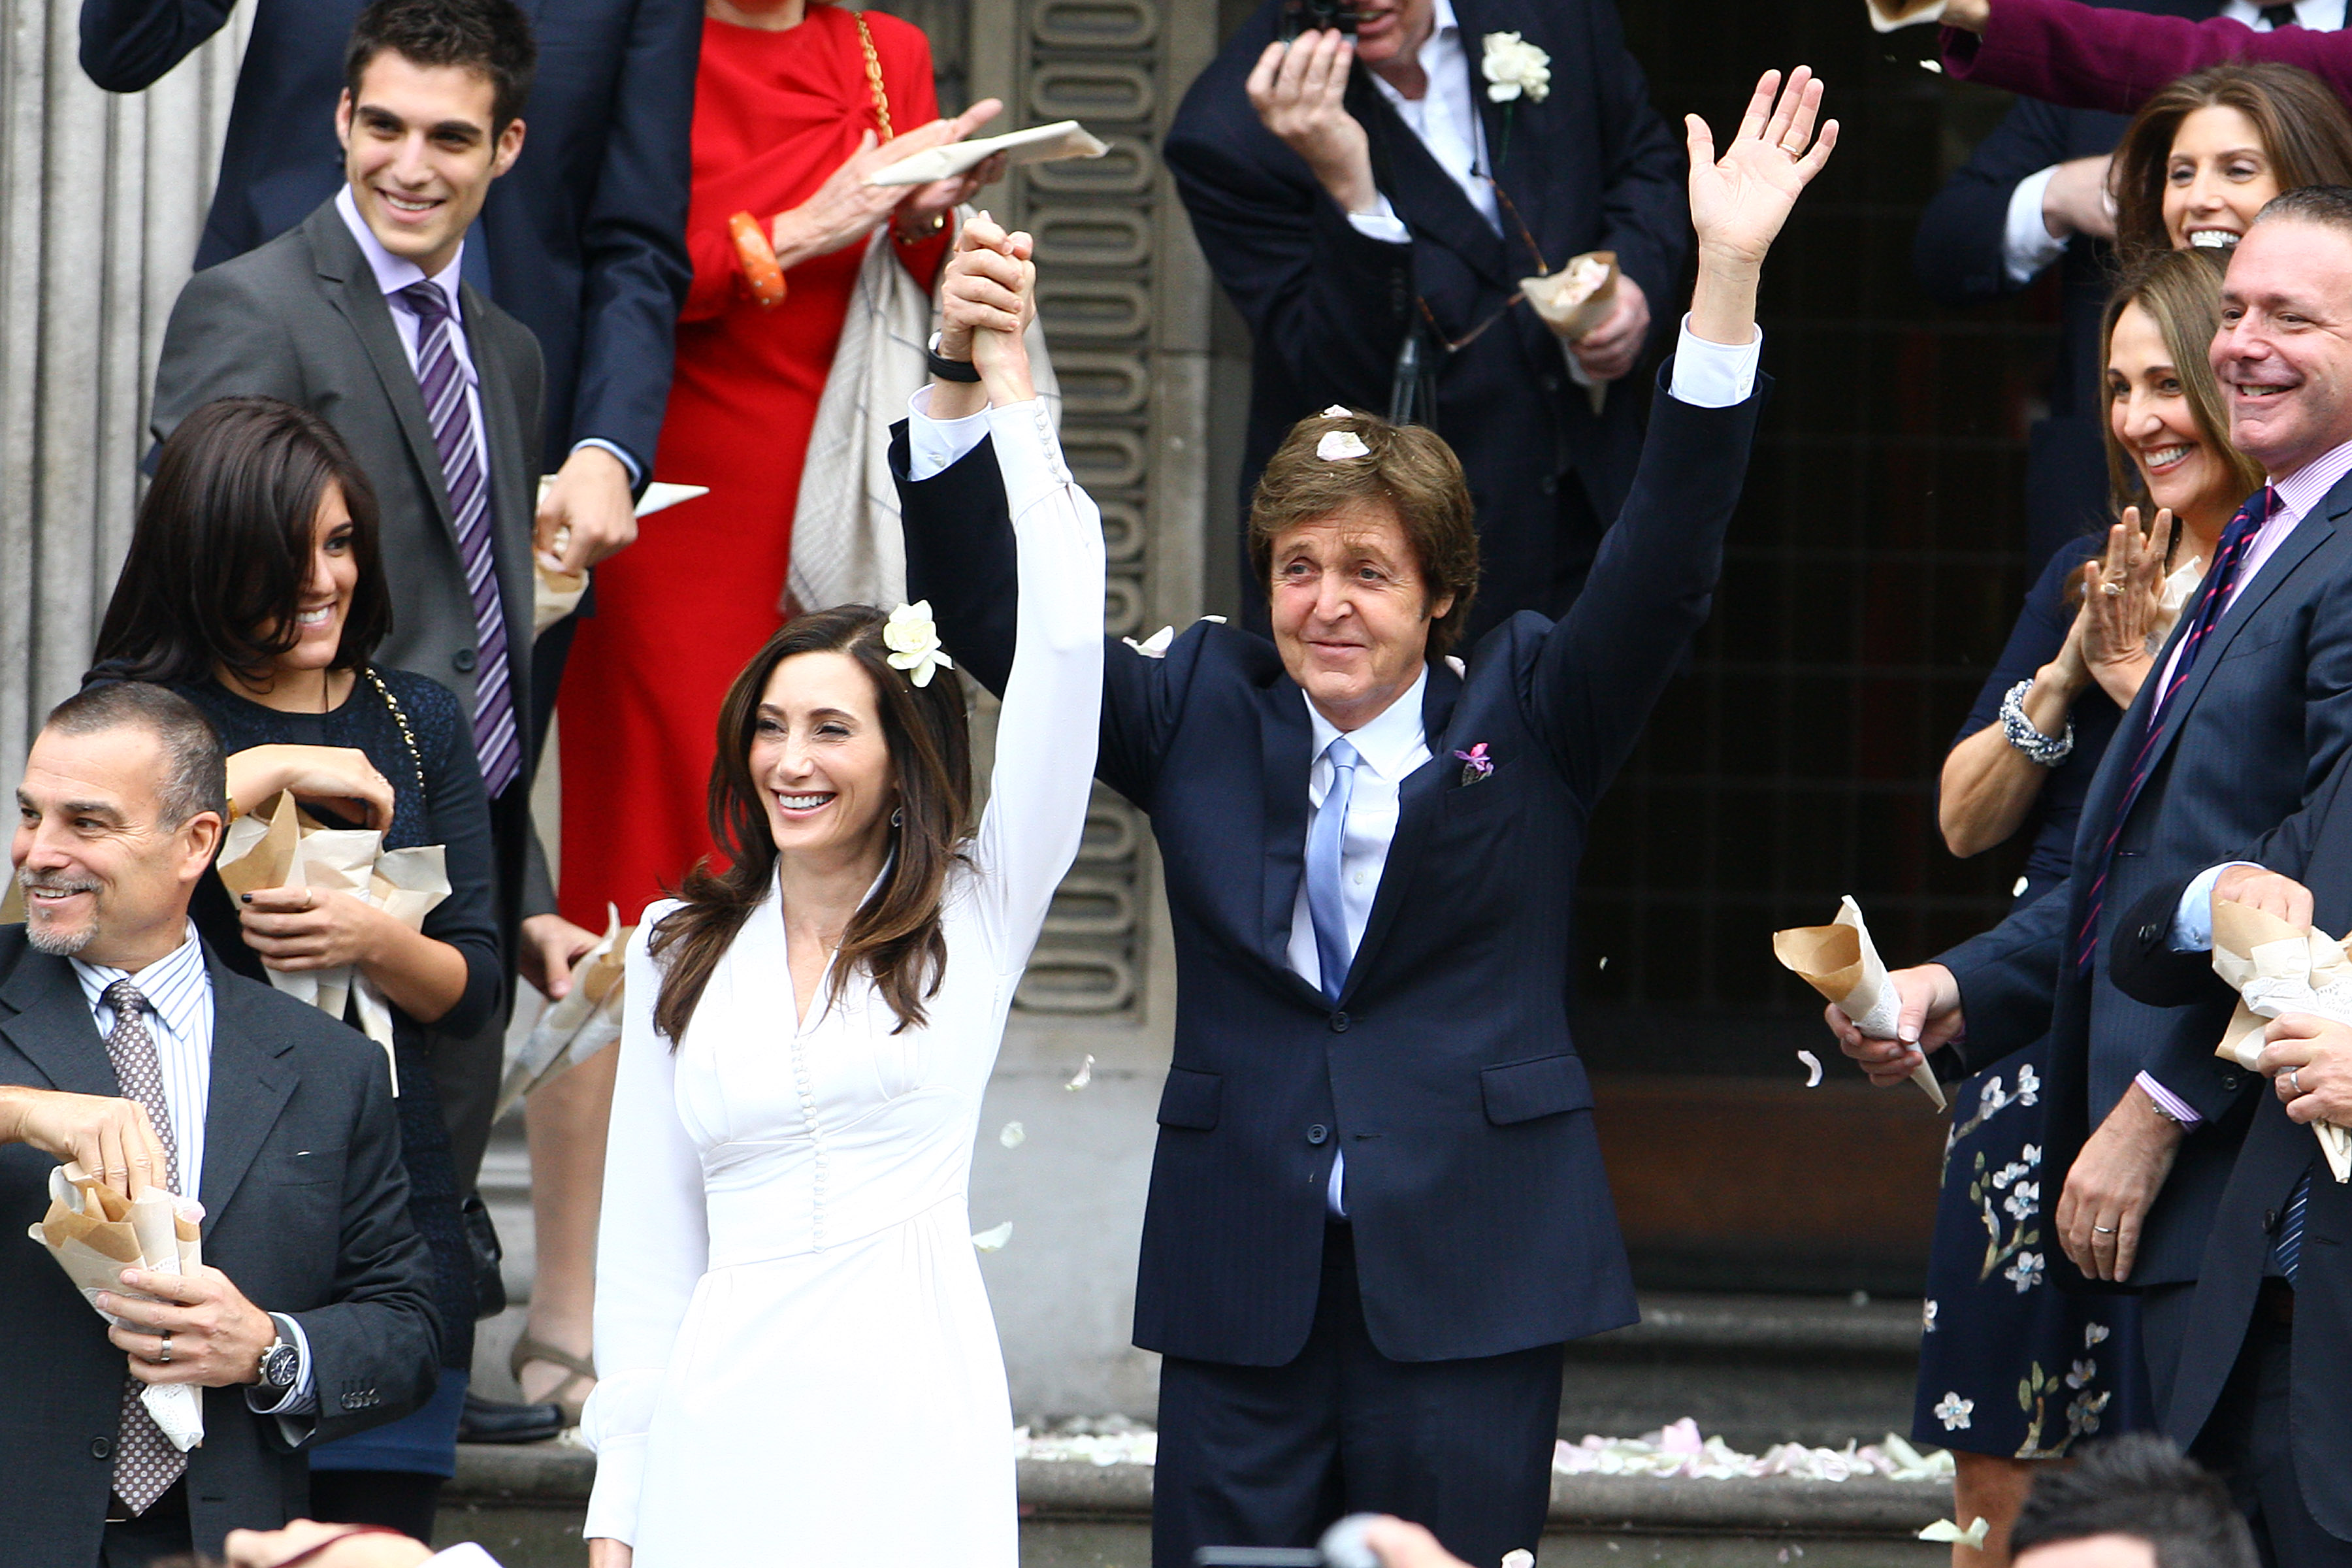 Paul McCartney and Nancy Shevell leaving their wedding ceremony at Marylebone Registry Office in central London, England on October 9, 2011 | Source: Getty Images